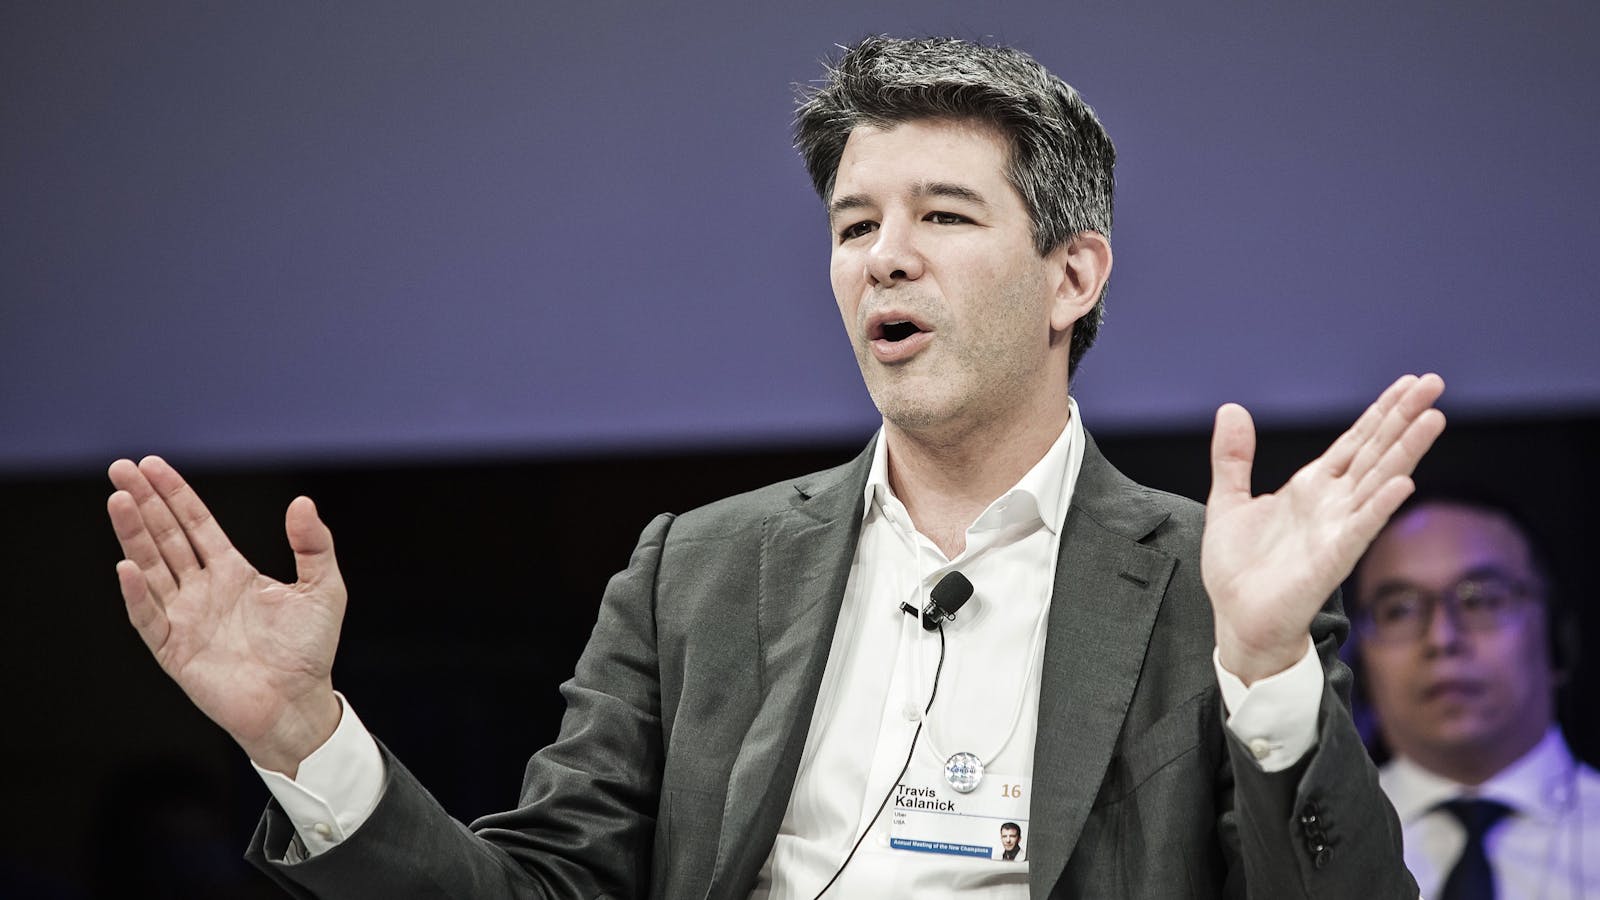 Uber's former CEO Travis Kalanick. Photo by Bloomberg.